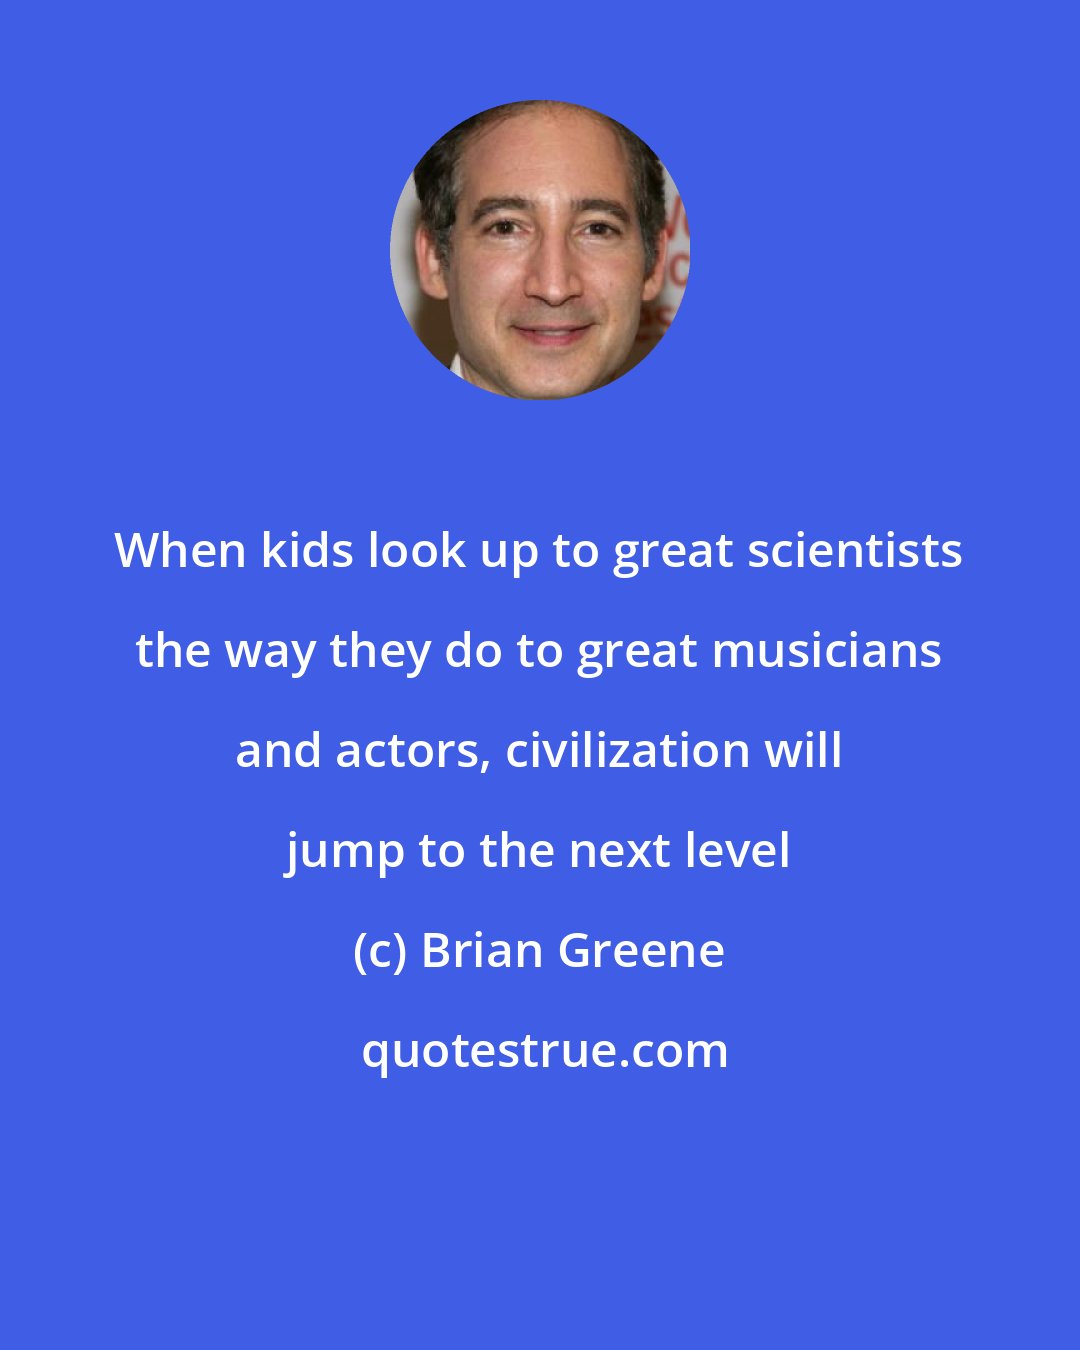 Brian Greene: When kids look up to great scientists the way they do to great musicians and actors, civilization will jump to the next level